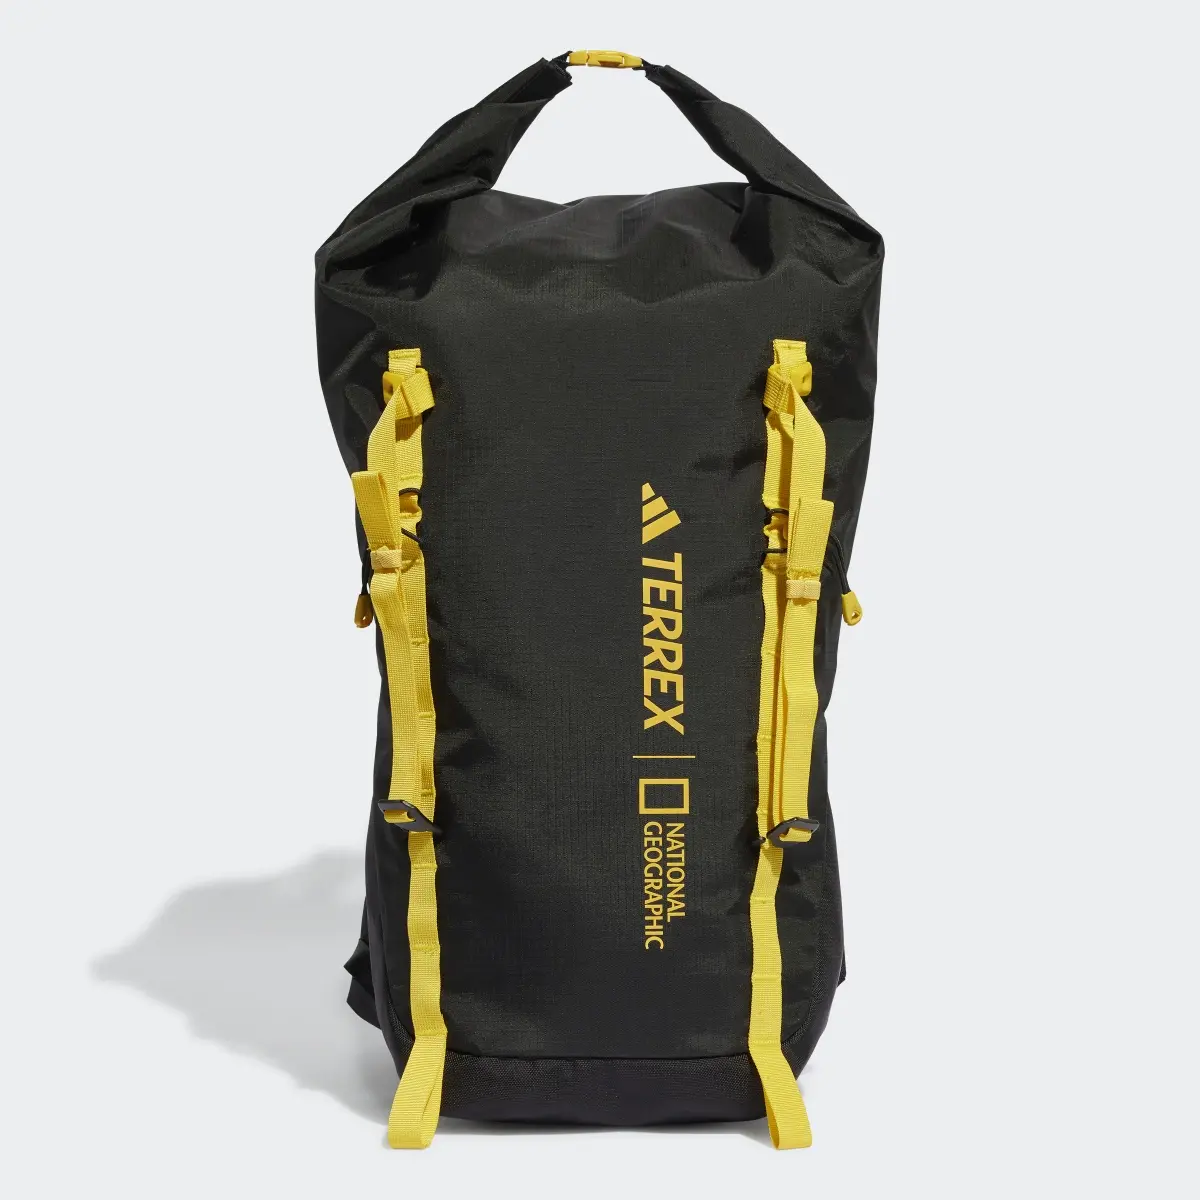 Adidas Colorful x National Geographic AEROREADY Backpack. 2